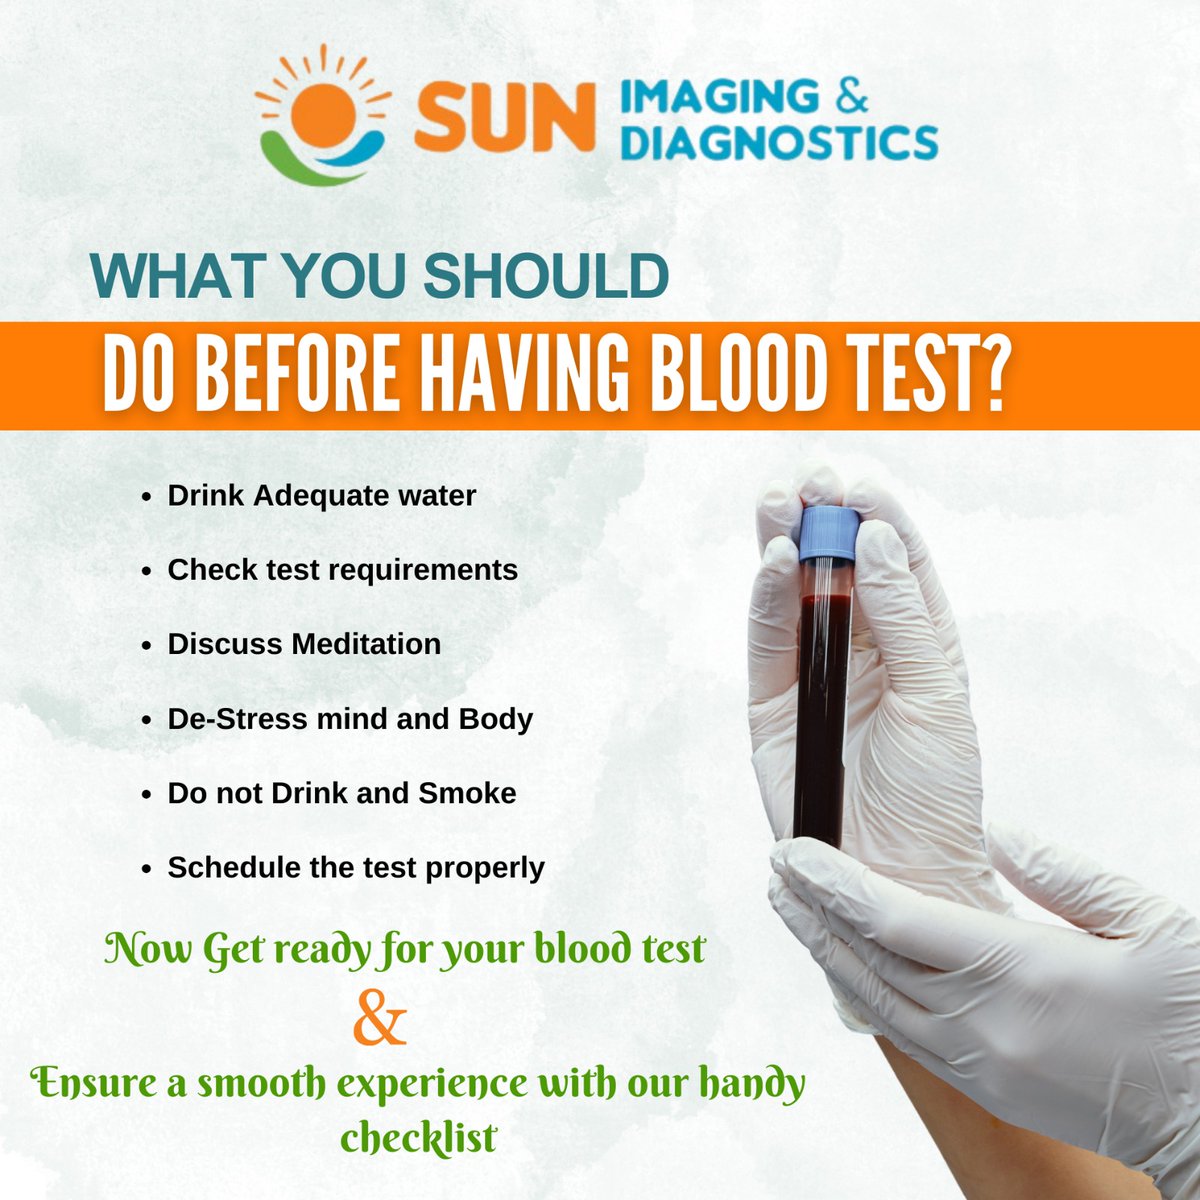 Preparing for your blood test? 🩸

#HealthyLiving #BloodTest #HydrationIsKey #HealthCheck #StressFree #PrioritizeHealth #ViralHealthTips #HealthAwareness #HealthyLifestyle #ExploreHealth #DiagnosticCentre #findapro #recommendations #recommended #HealthAndWellness #StayFit